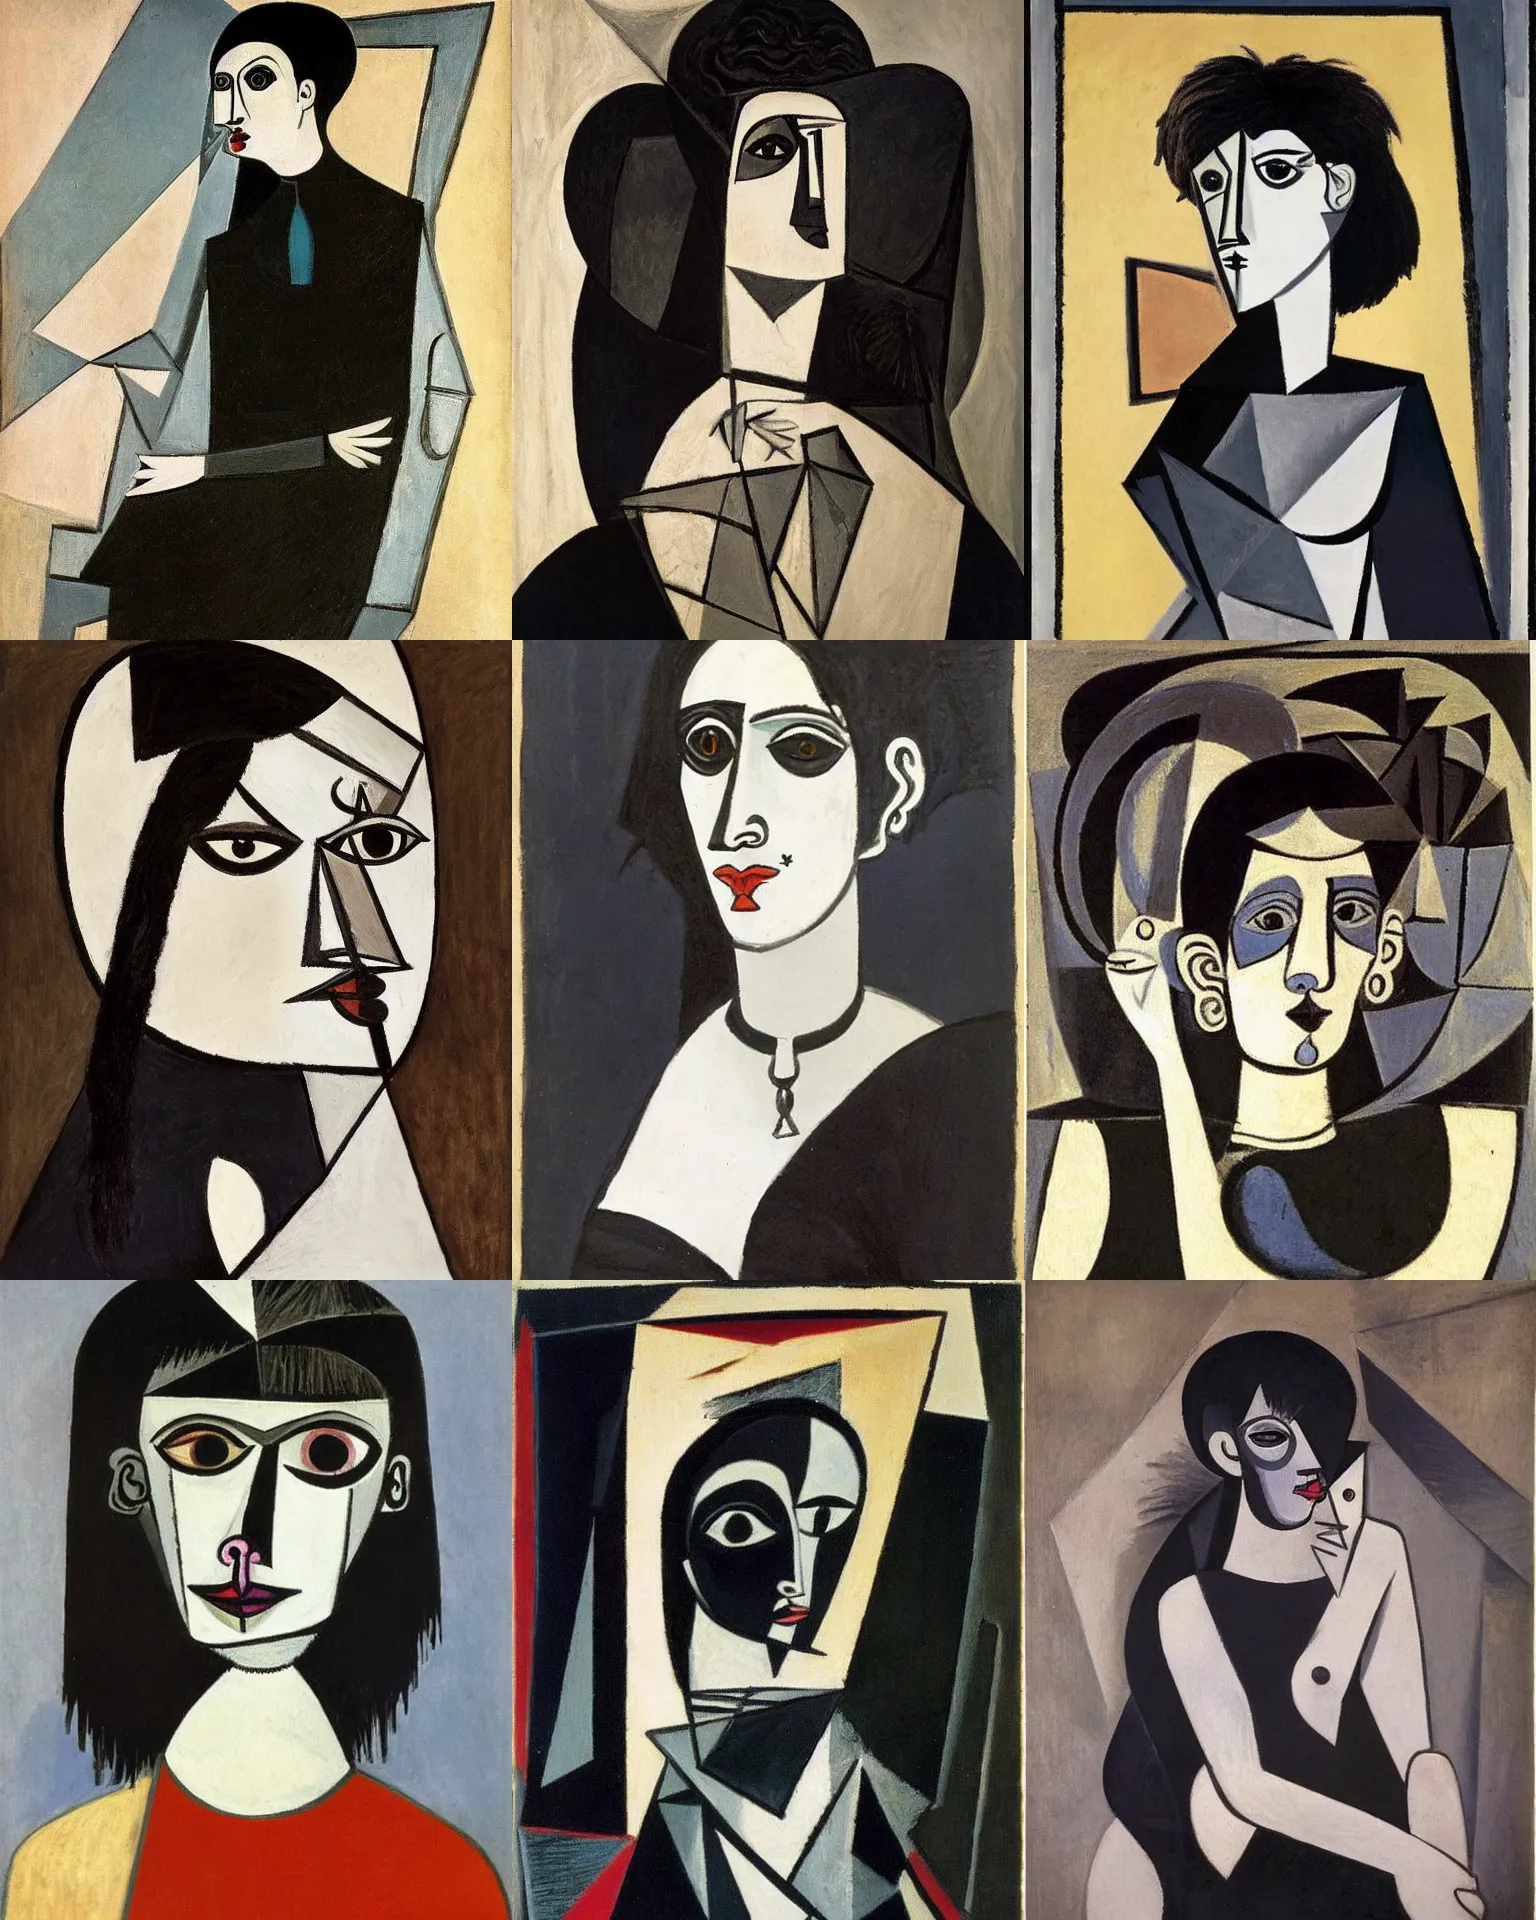 Prompt: A goth portrait by Pablo Picasso. Her hair is dark brown and cut into a short, messy pixie cut. She has a slightly rounded face, with a pointed chin, large entirely-black eyes, and a small nose. She is wearing a black tank top, a black leather jacket, a black knee-length skirt, a black choker, and black leather boots.